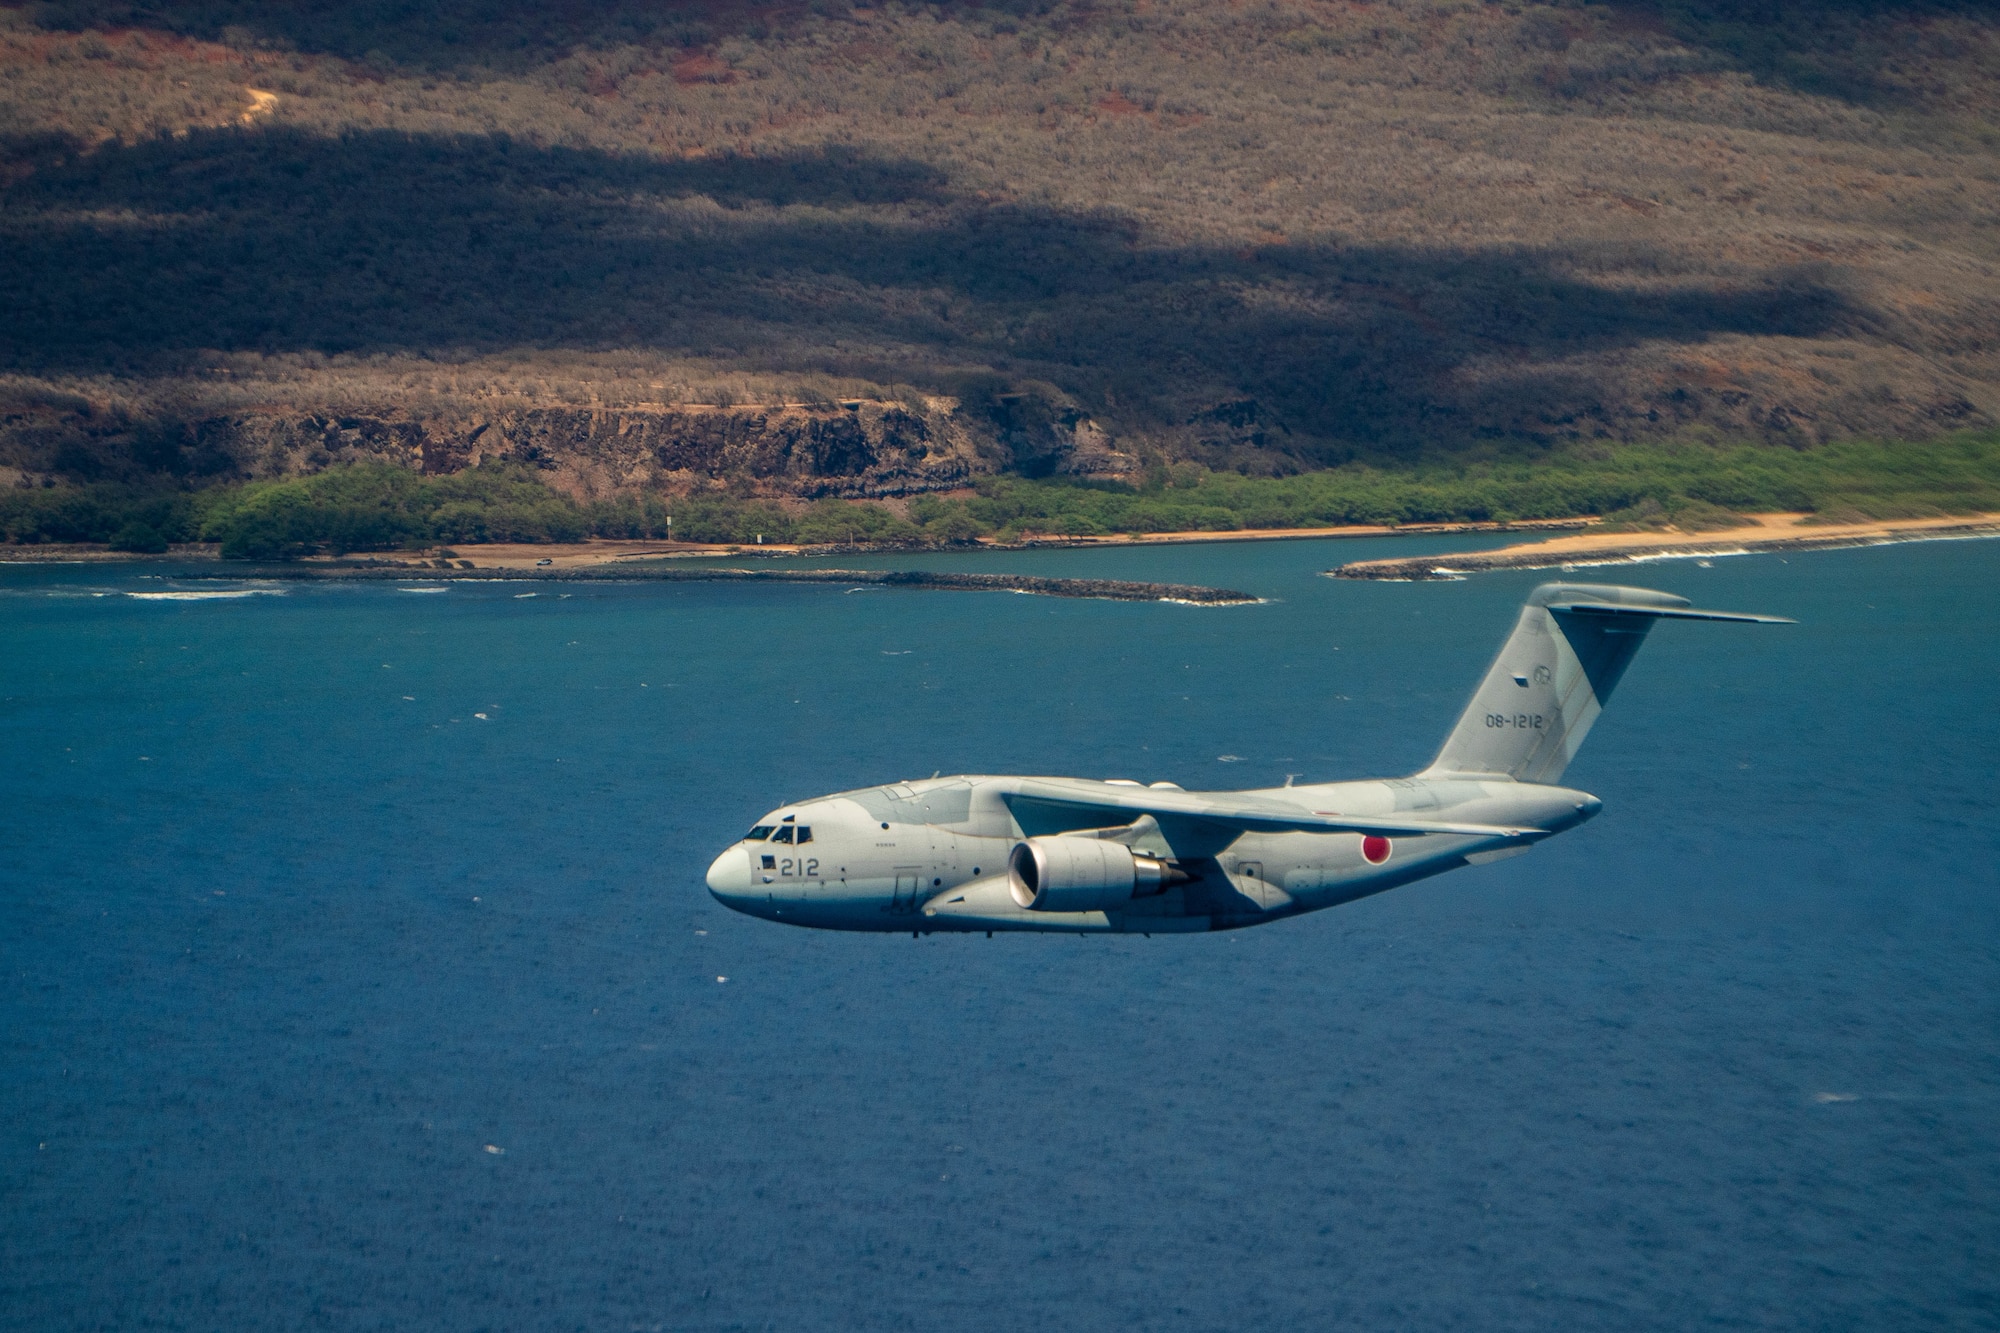 A Kawasaki C-2 from the 403rd Tactical Airlift Squadron flies in a formation during a bilateral training exercise with the 535th Airlift Squadron around the Hawaiian Islands, Sept. 27, 2022. The 3-day training focused on interoperability between the C-2 and C17 Globemaster III to cultivate best practices for future operations within the Indo-Pacific region. (U.S. Air Force photo by Senior Airman Makensie Cooper)